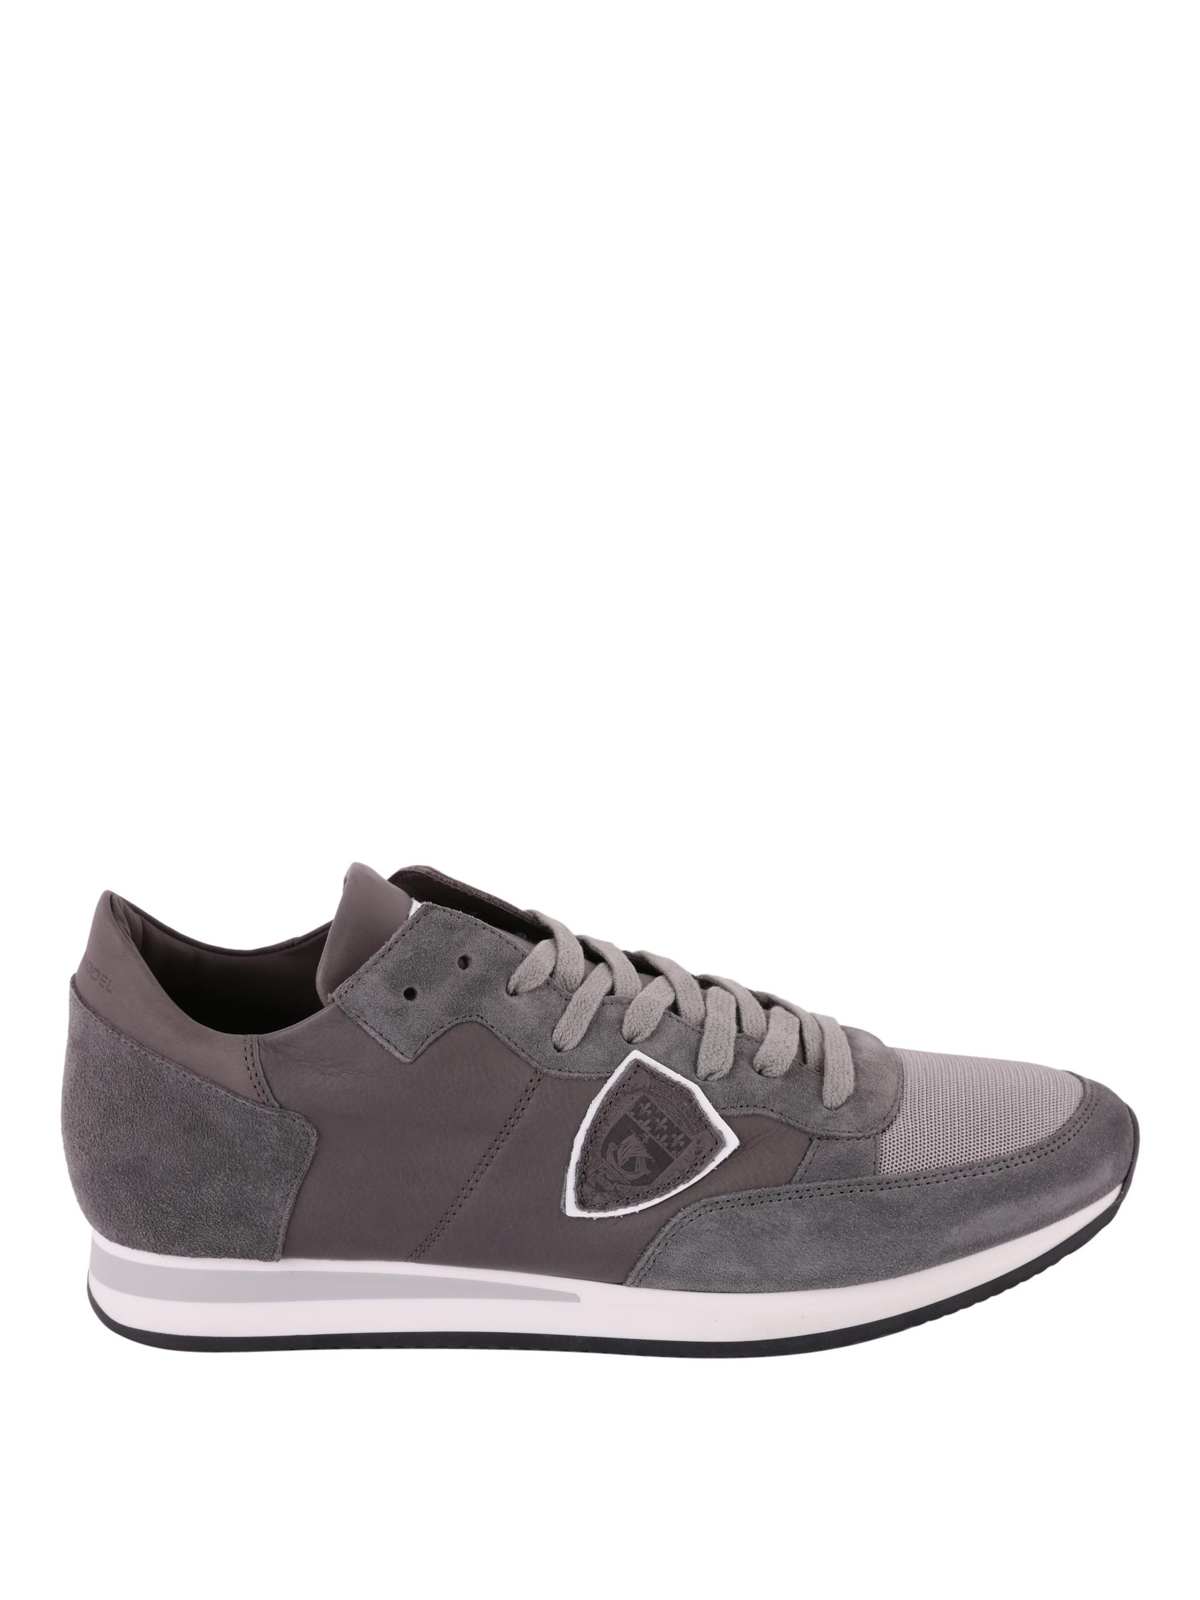 Philippe Model - Tropez total grey suede and nylon sneakers - trainers ...